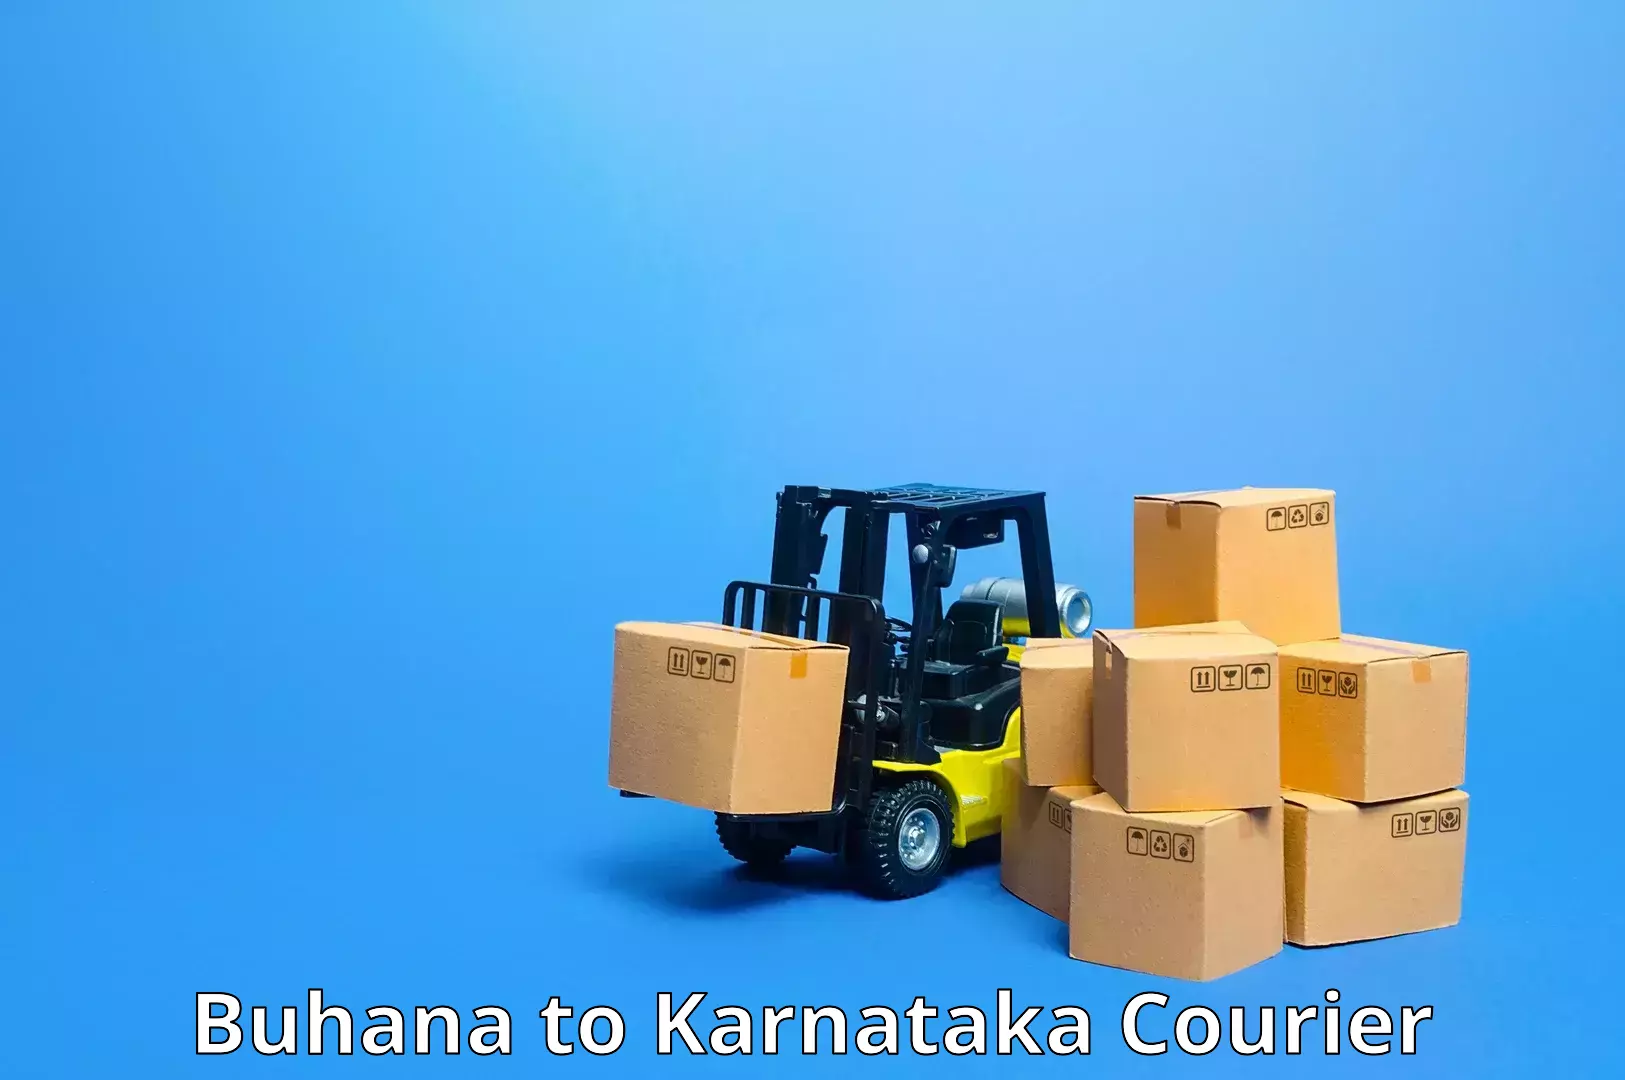 Flexible delivery scheduling Buhana to Heggadadevankote